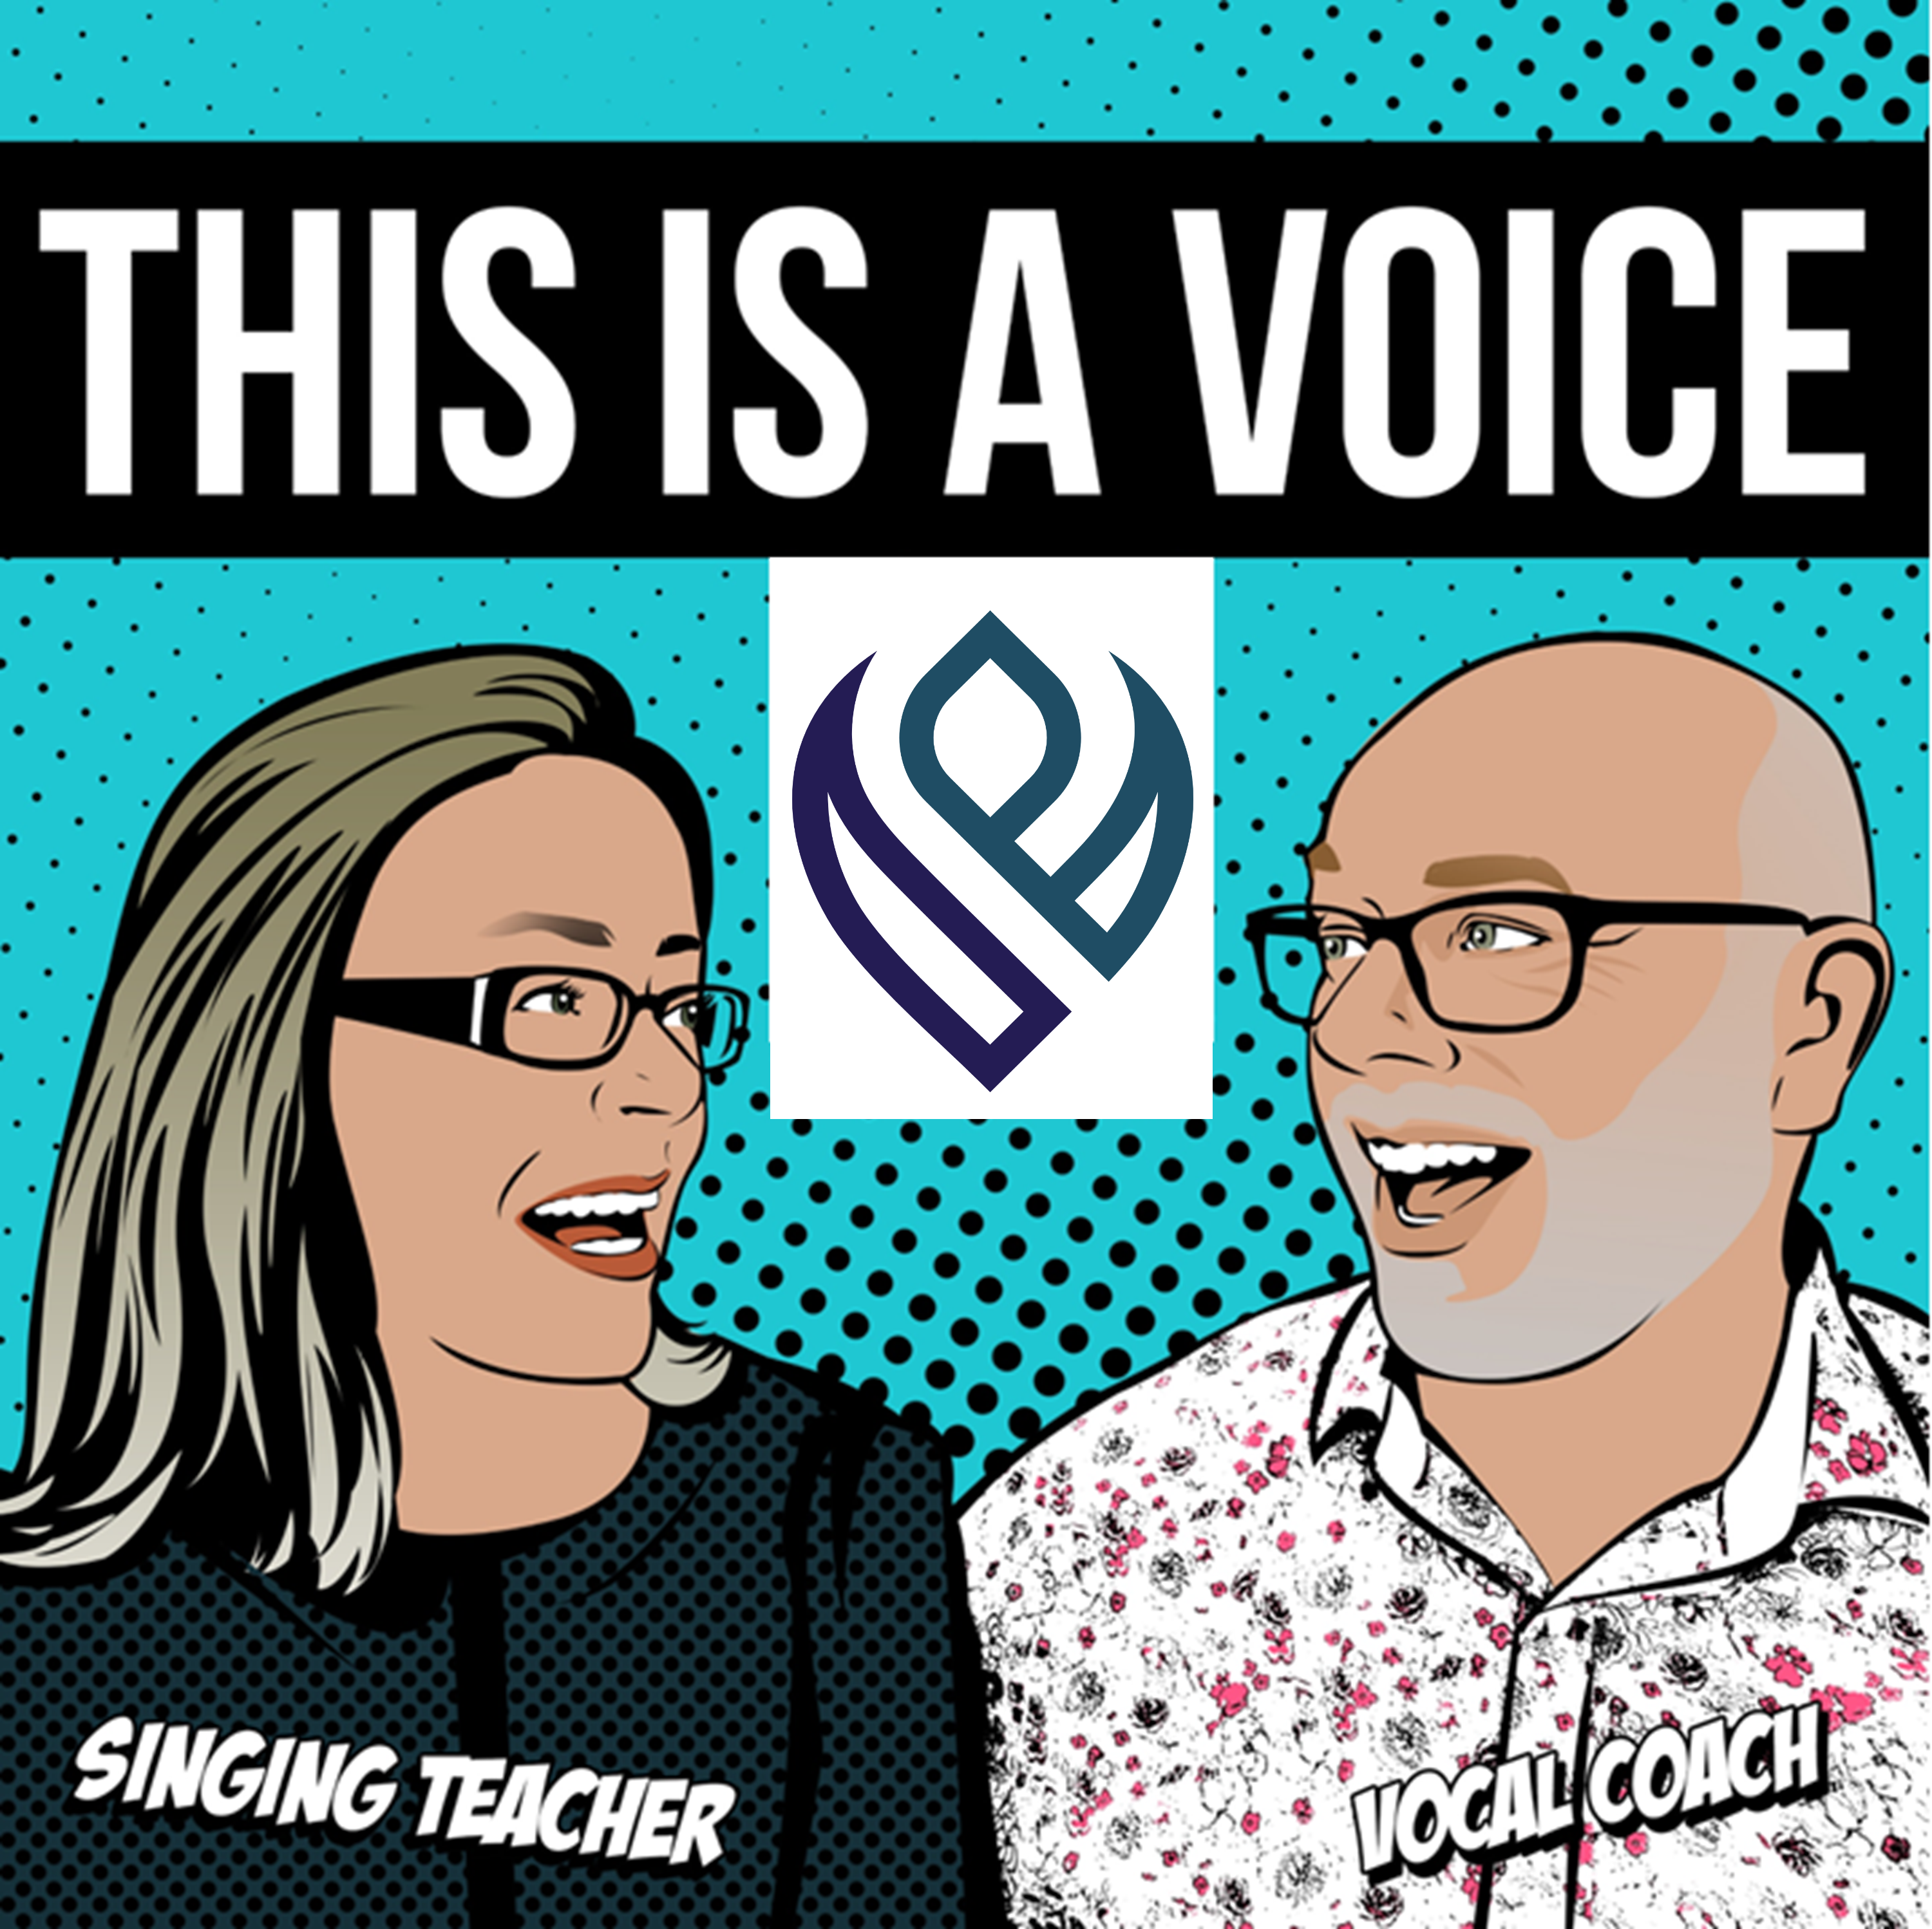 This is a Voice podcast logo